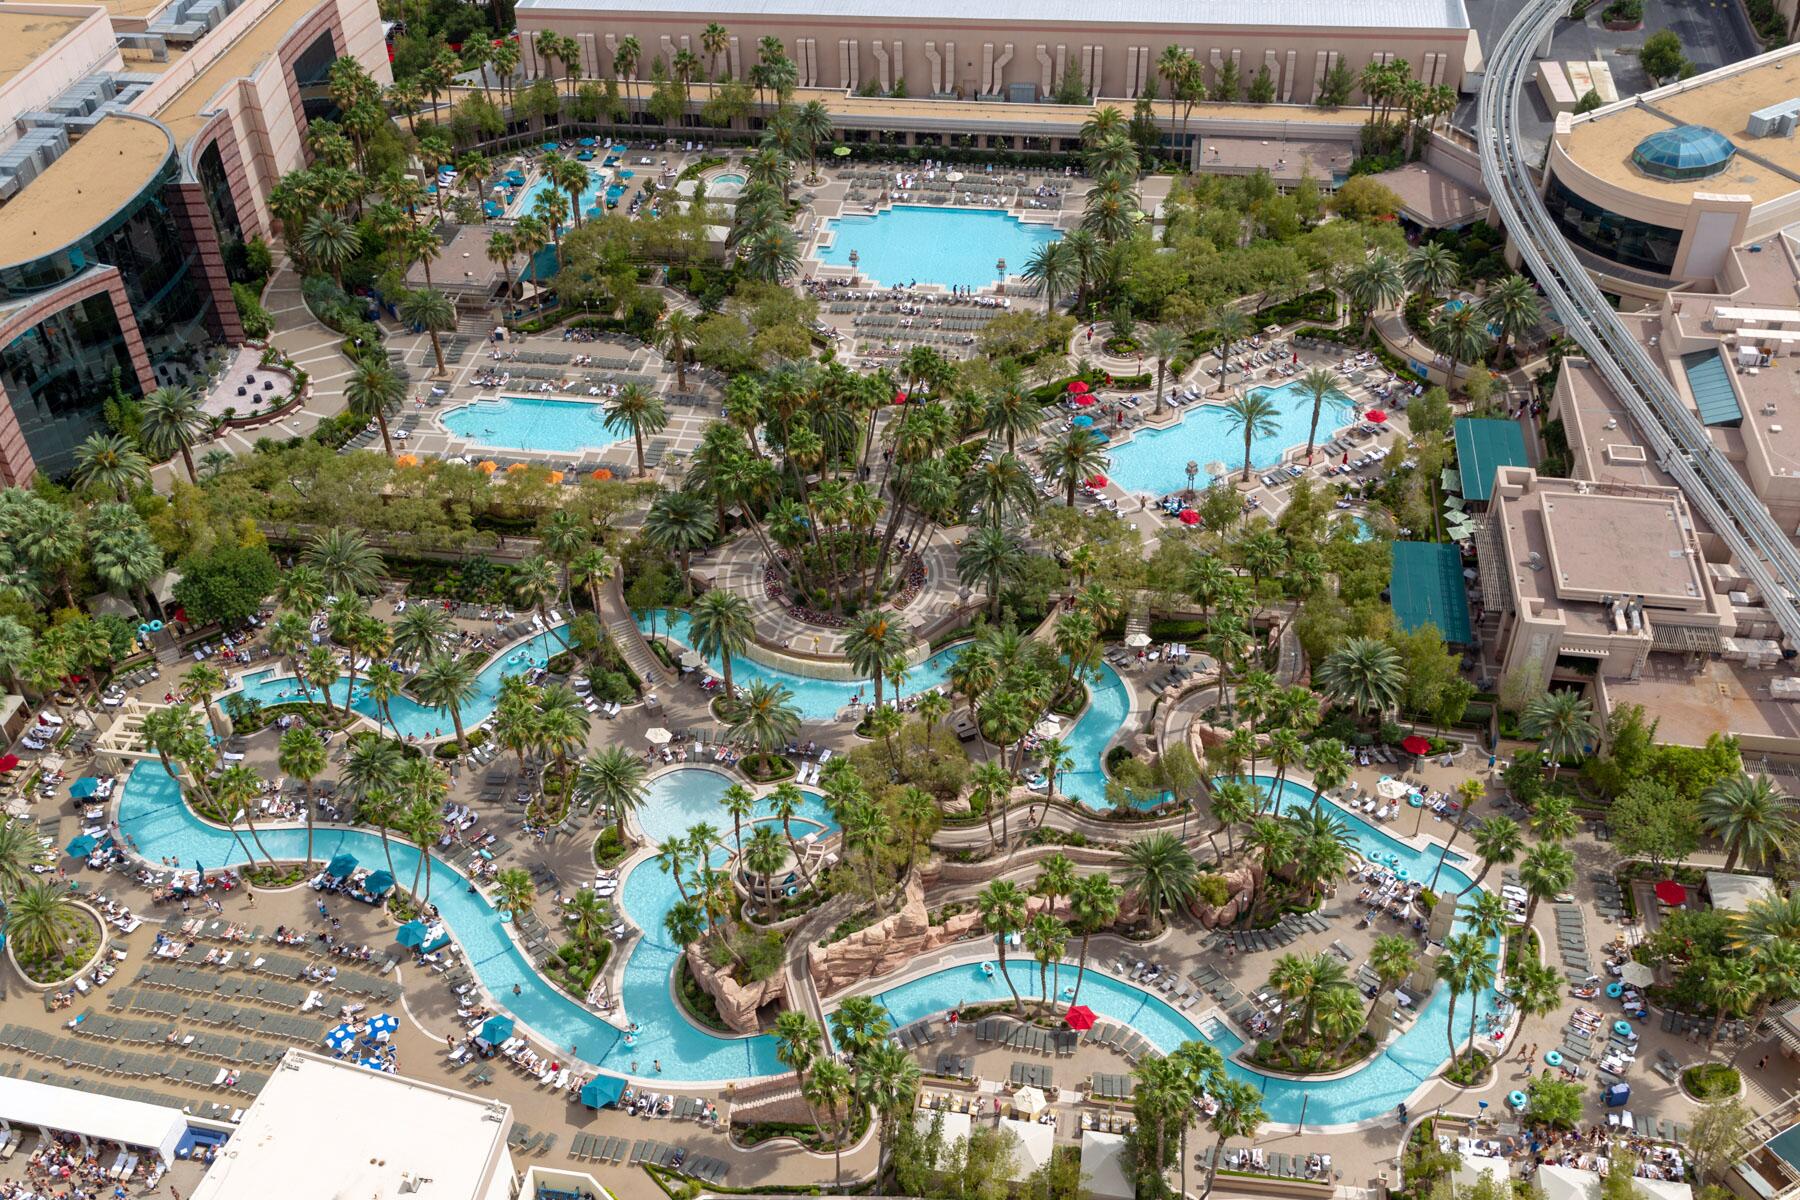 6 Lazy Rivers In Las Vegas To Relax In